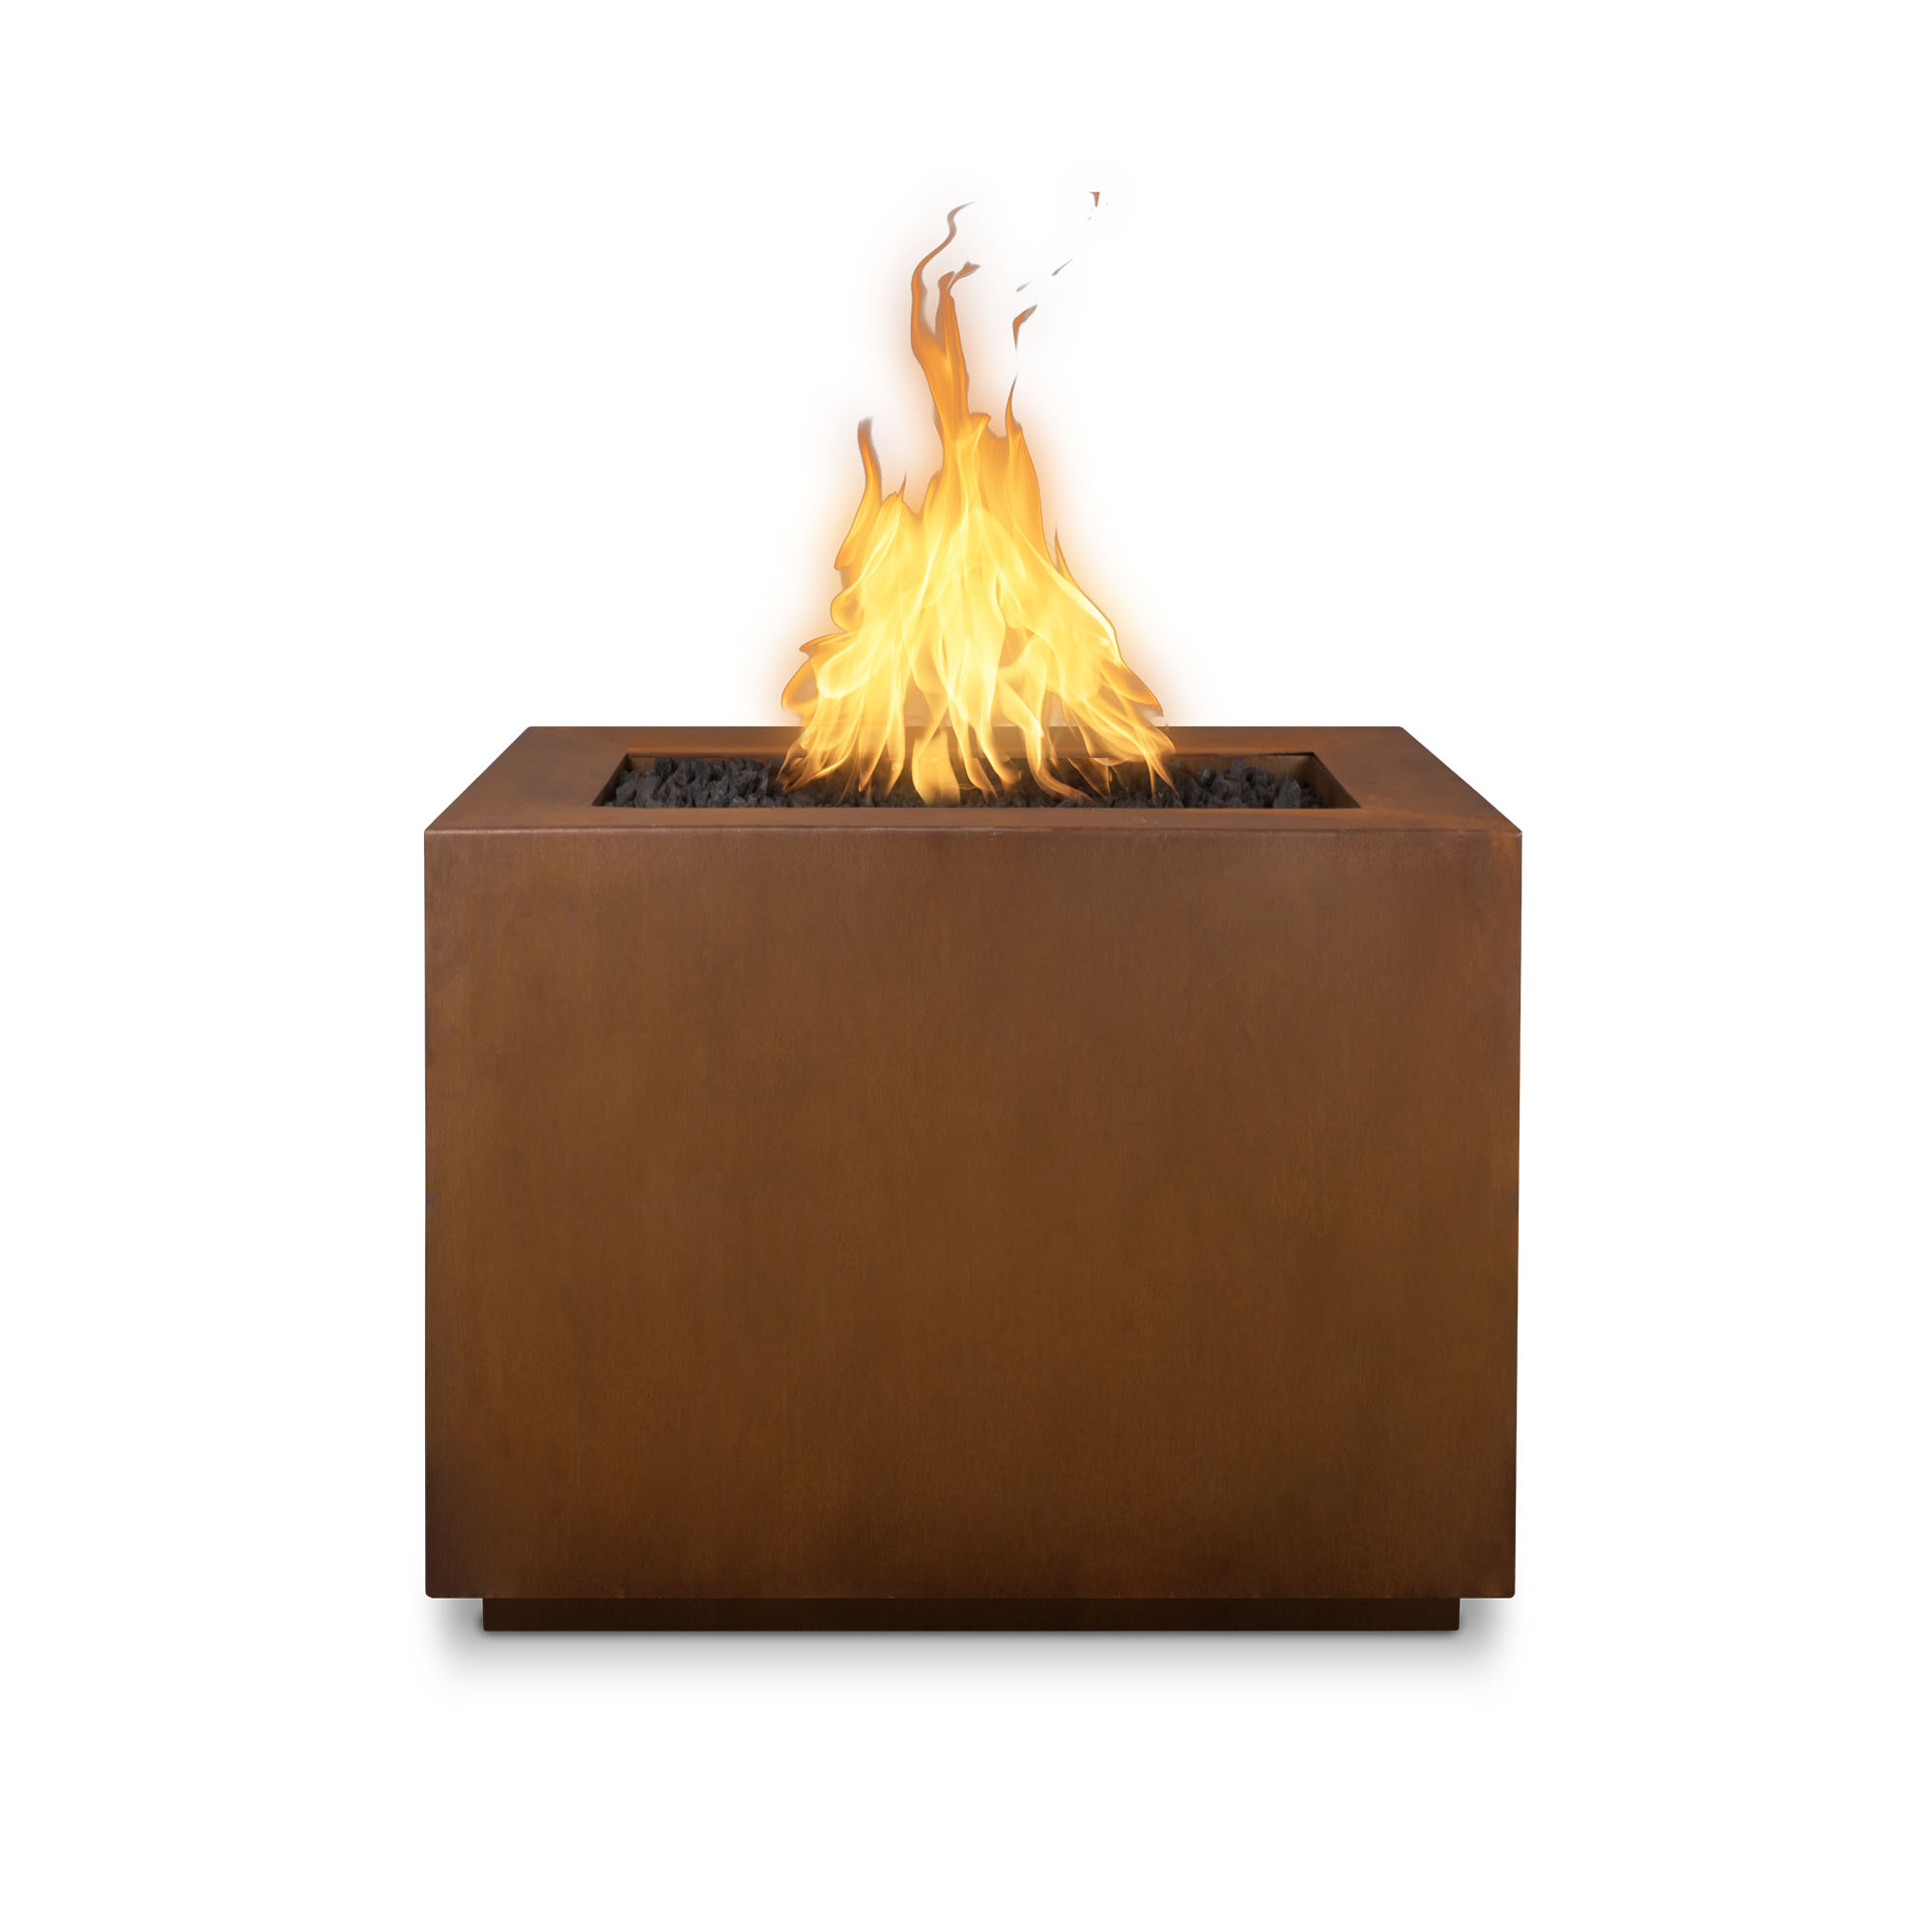 FORMA FIRE PIT – METAL COLLECTION